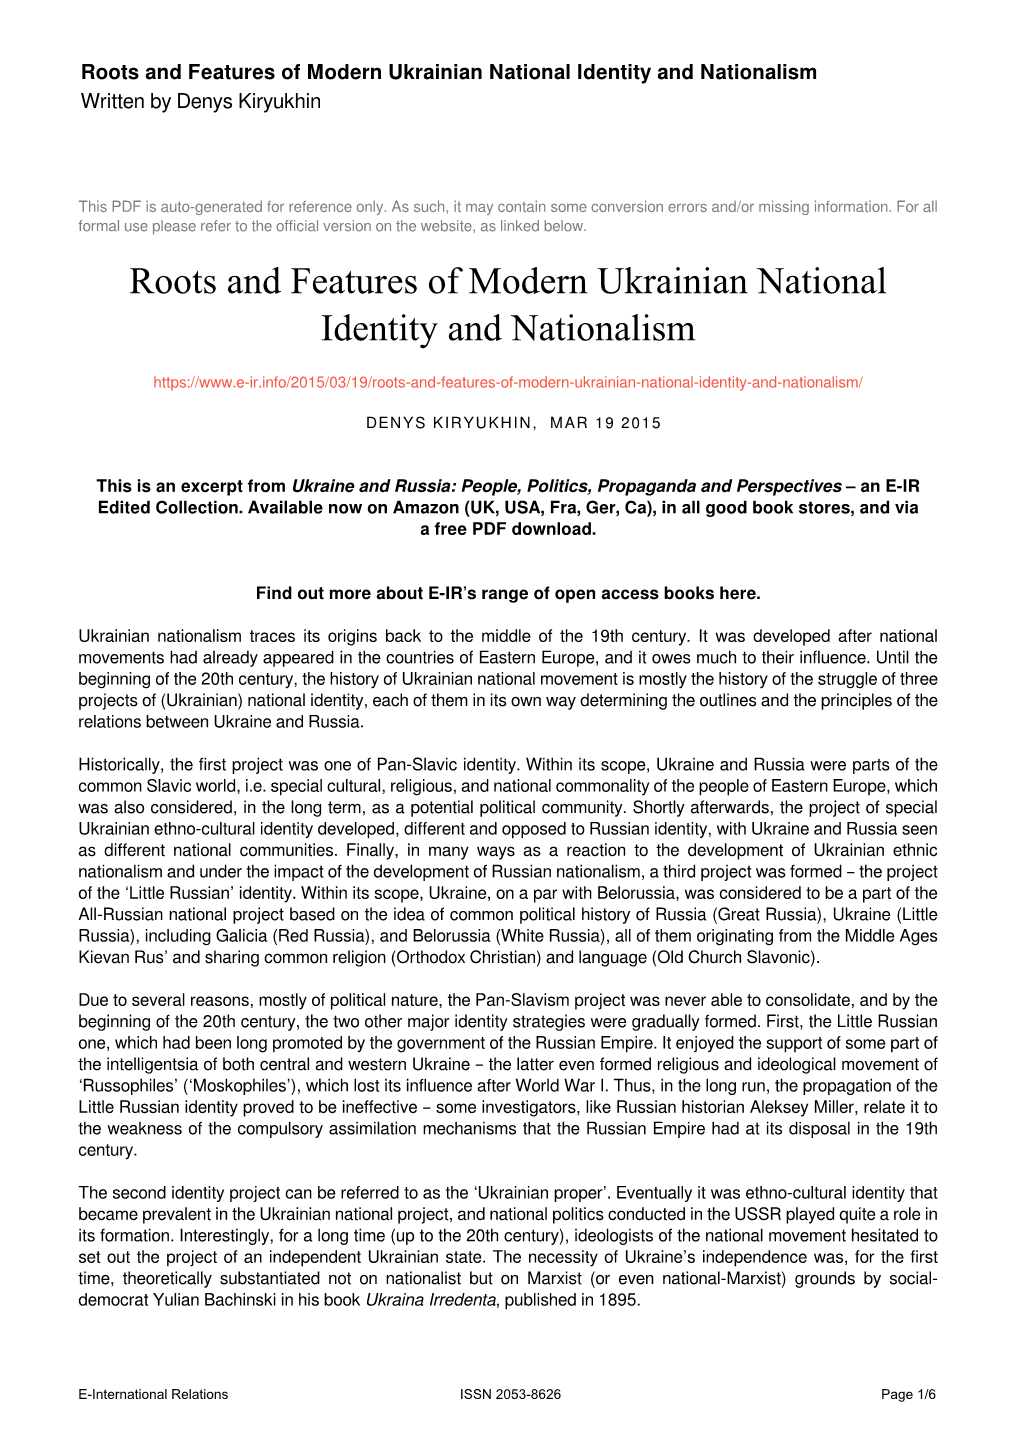 Roots and Features of Modern Ukrainian National Identity and Nationalism Written by Denys Kiryukhin